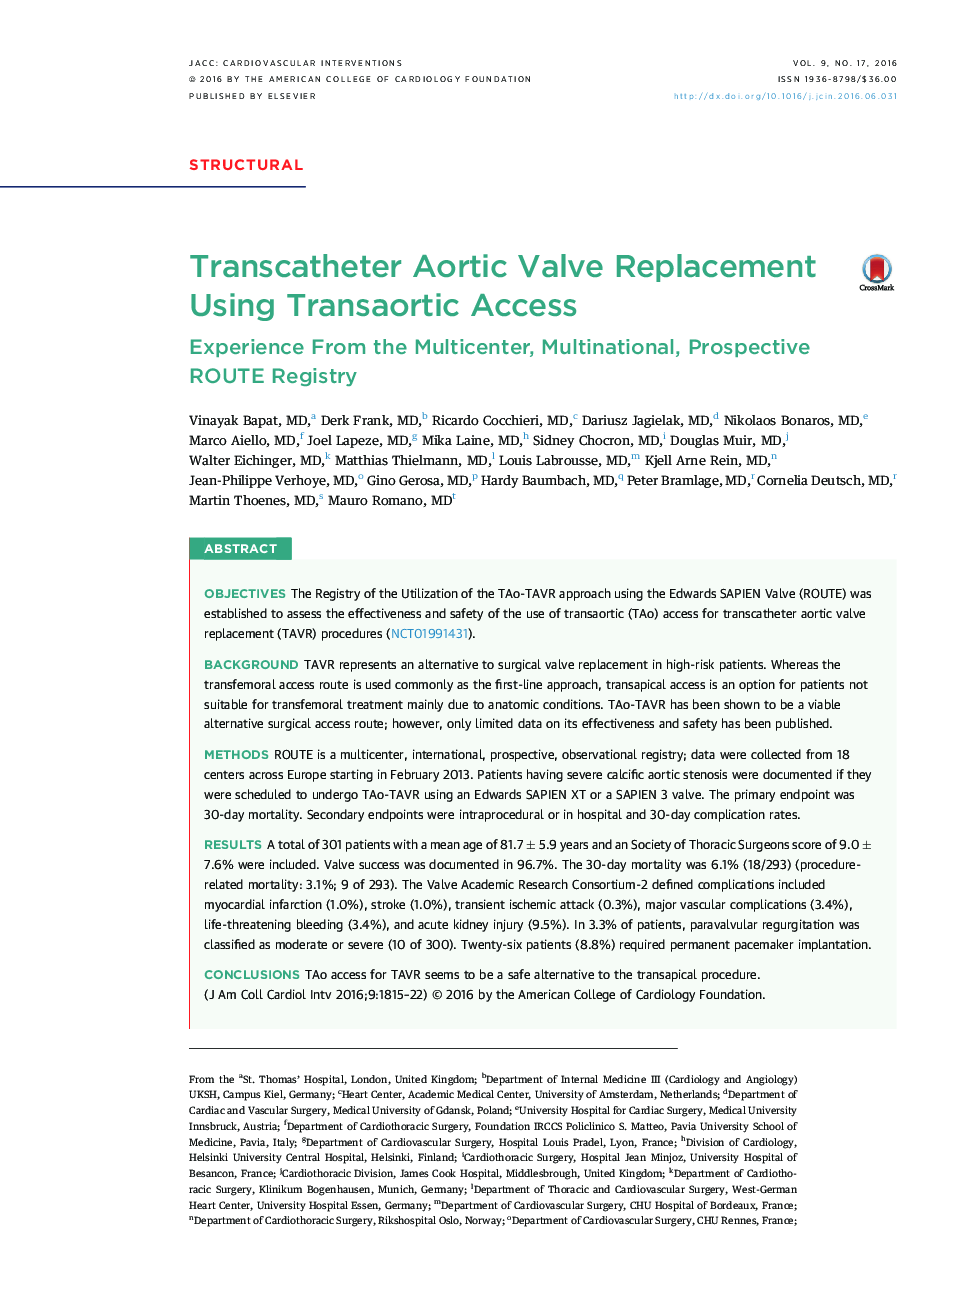 Transcatheter Aortic Valve Replacement Using Transaortic Access : Experience From the Multicenter, Multinational, Prospective ROUTE Registry